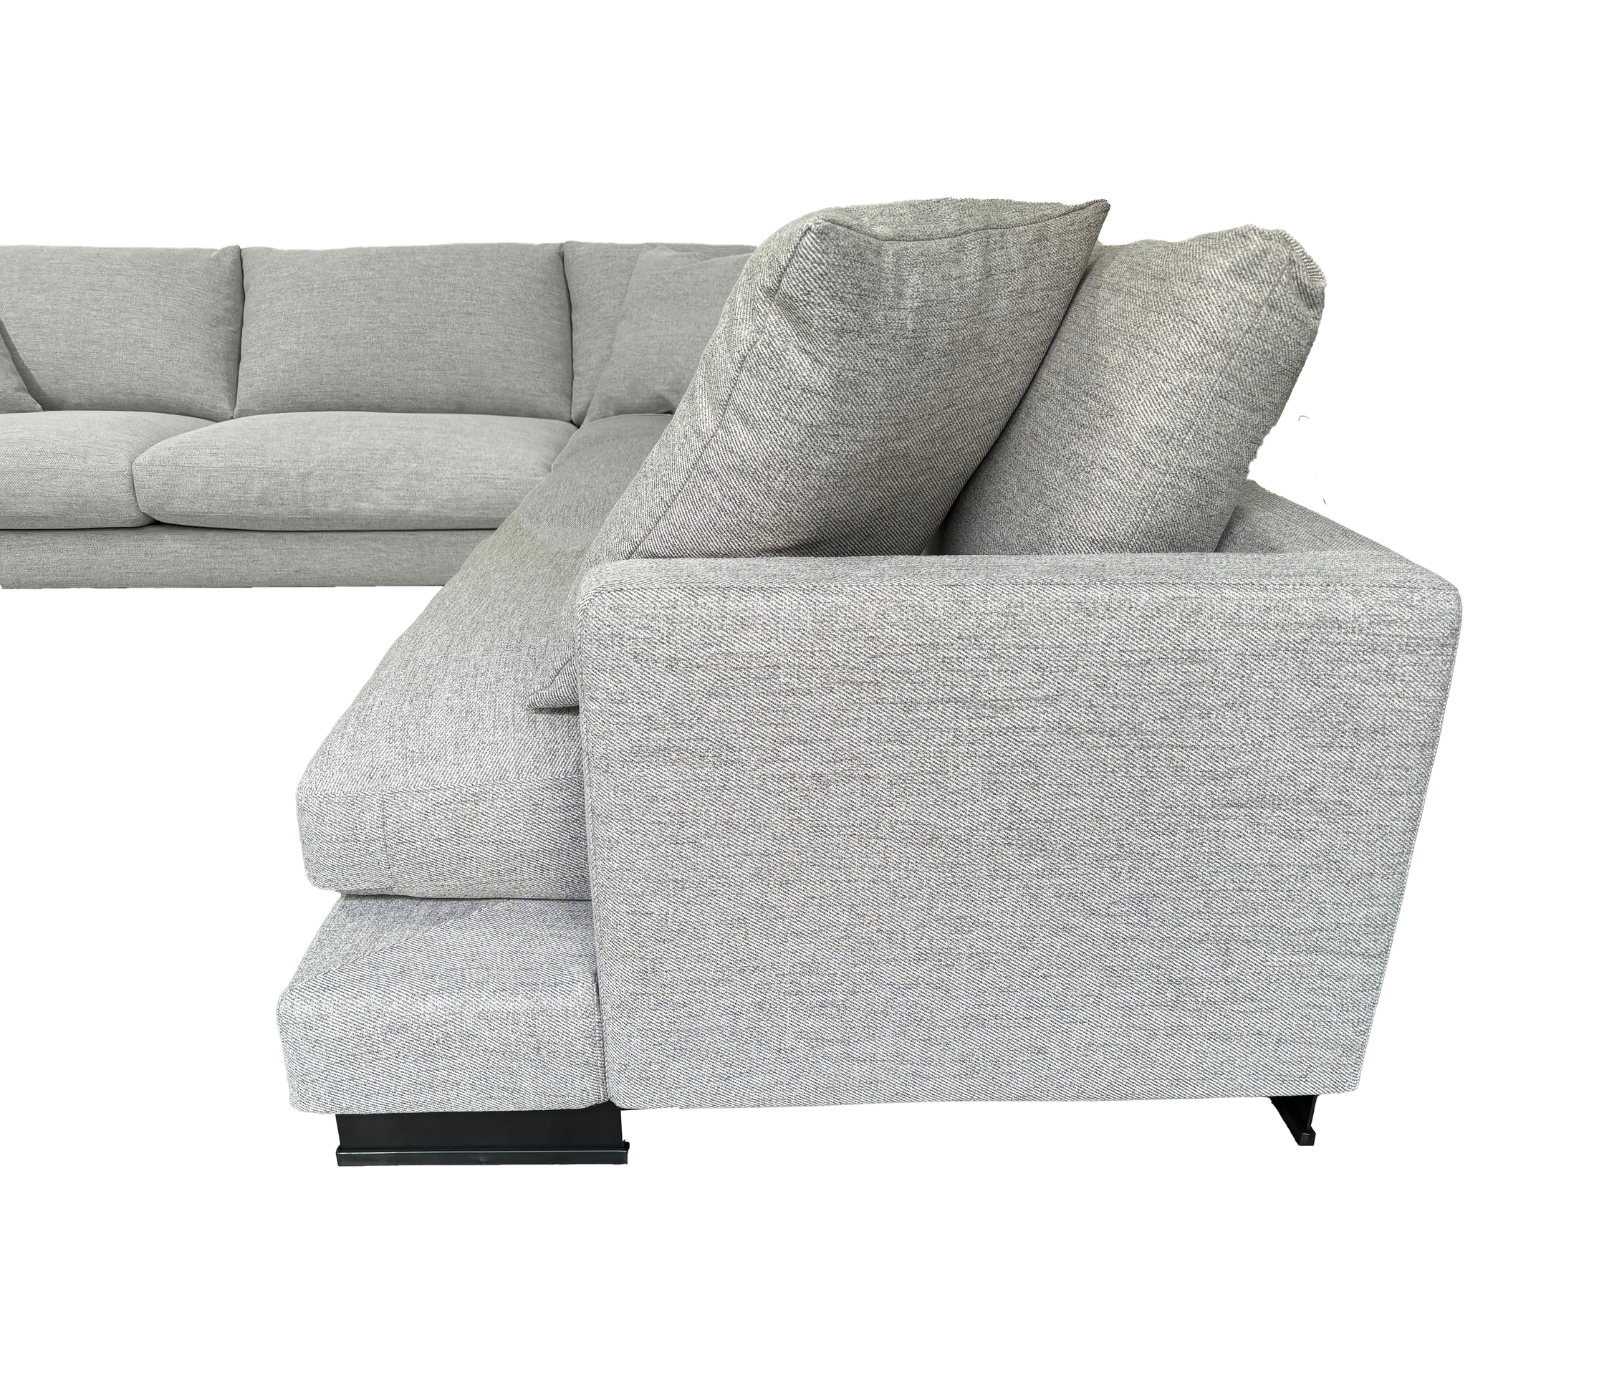 Weekender 3 Piece Sectional - Grey Fabric